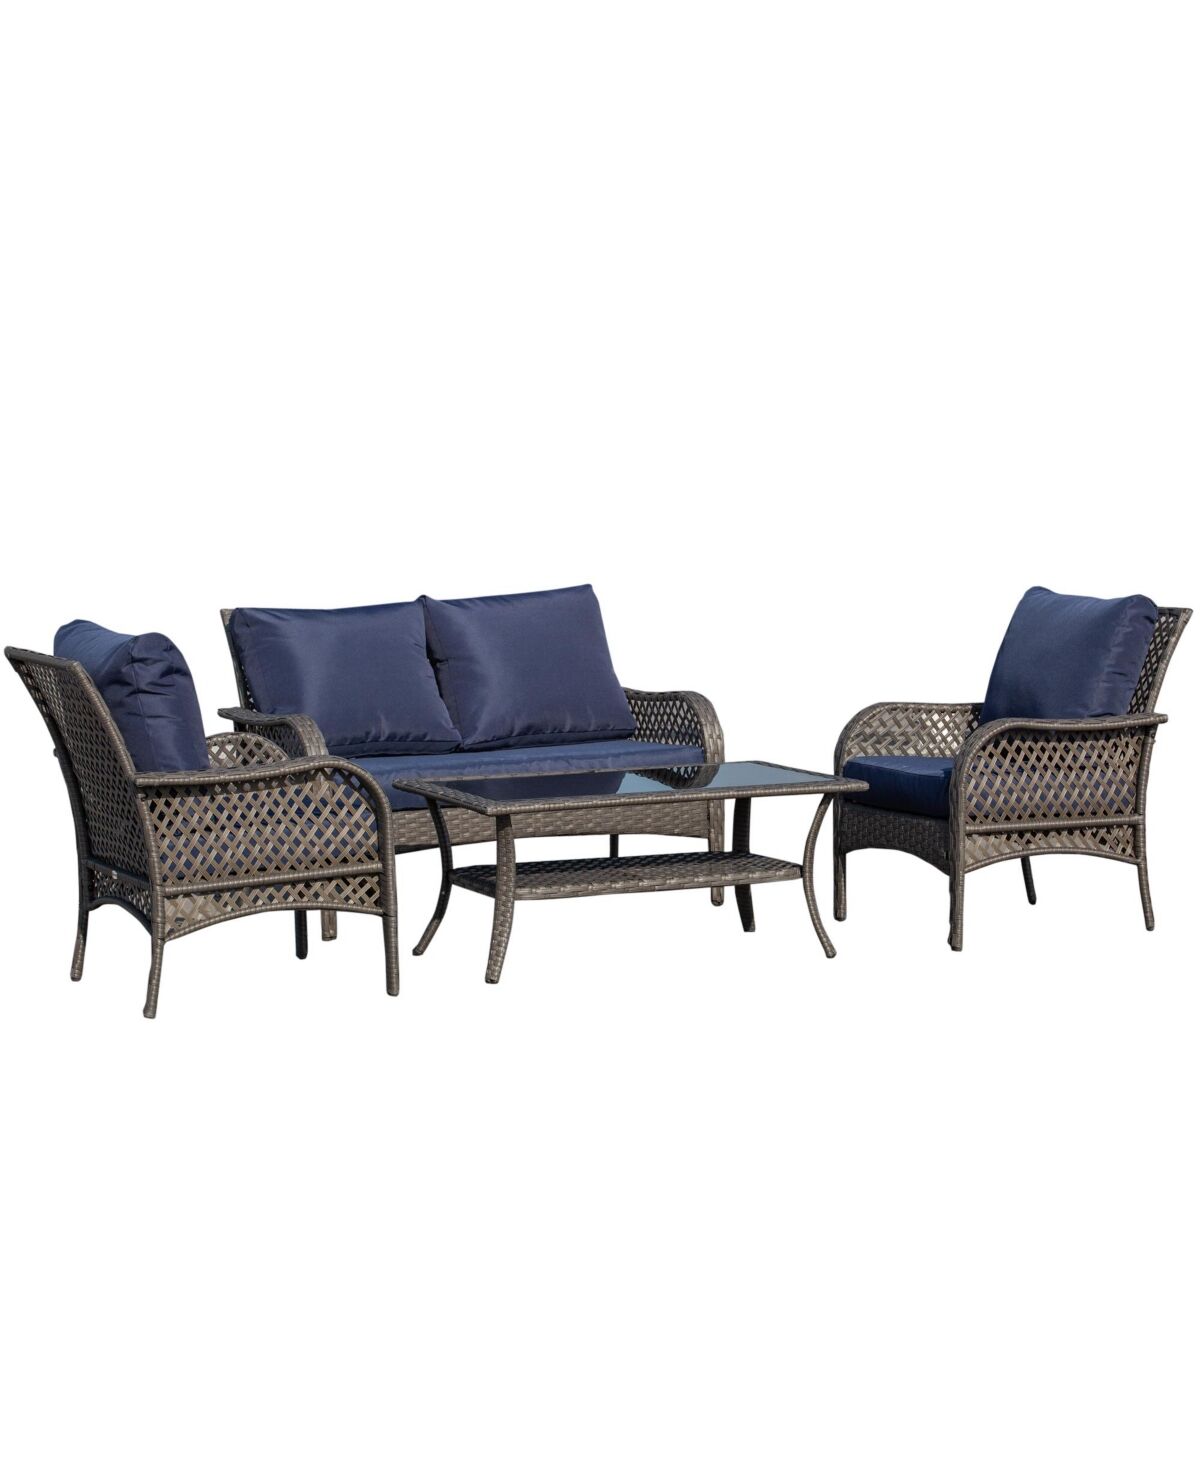 Outsunny 4-Piece Outdoor Wicker Sofa Set, Outdoor Pe Rattan Conversation Furniture with 4 Chairs & Table, Water-Fighting Material, Blue - Blue